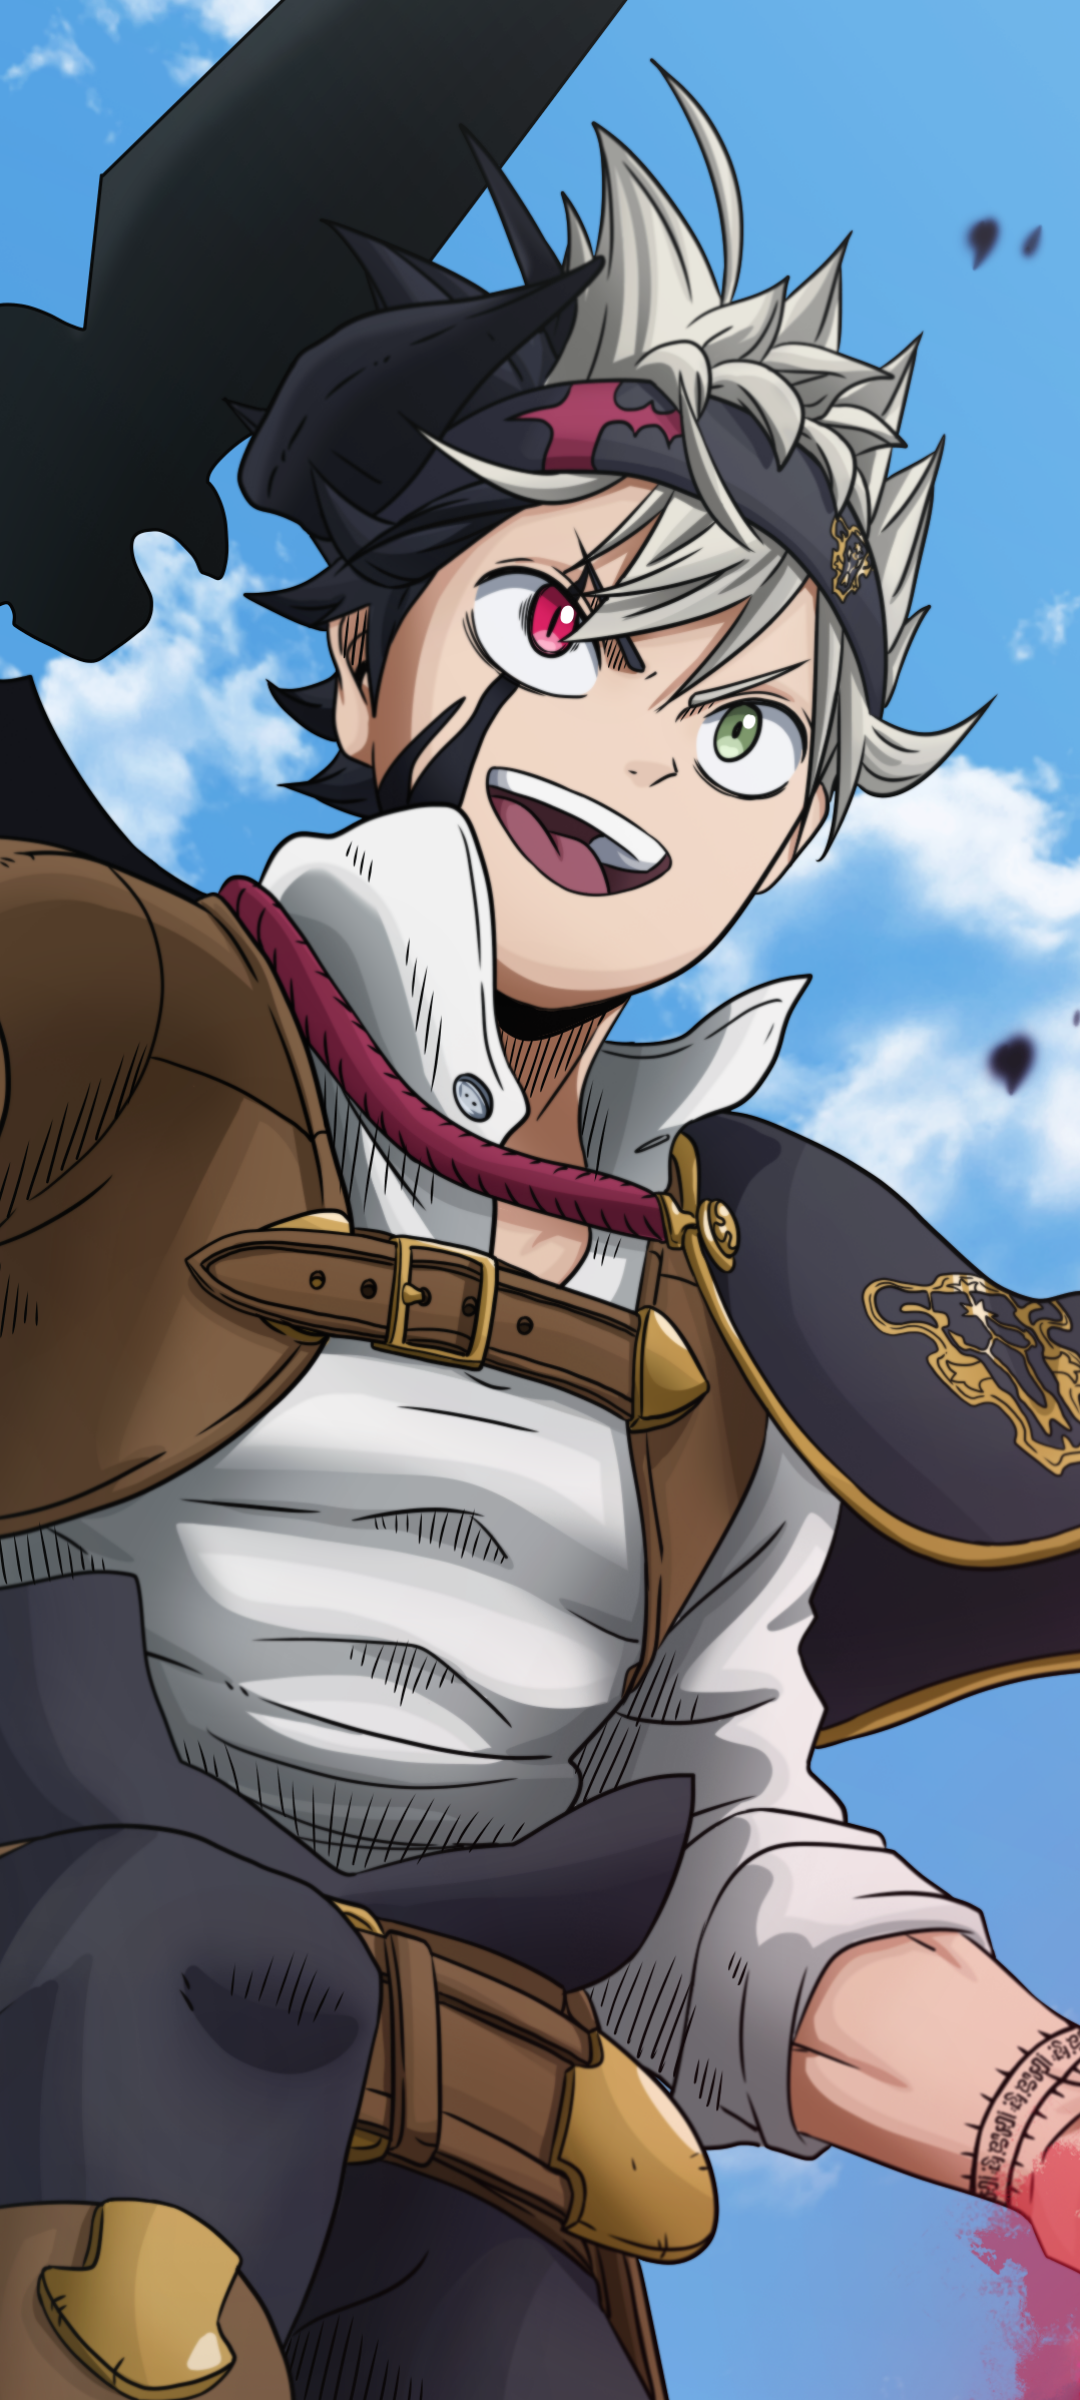 Asta by Shyrose - Mobile Abyss